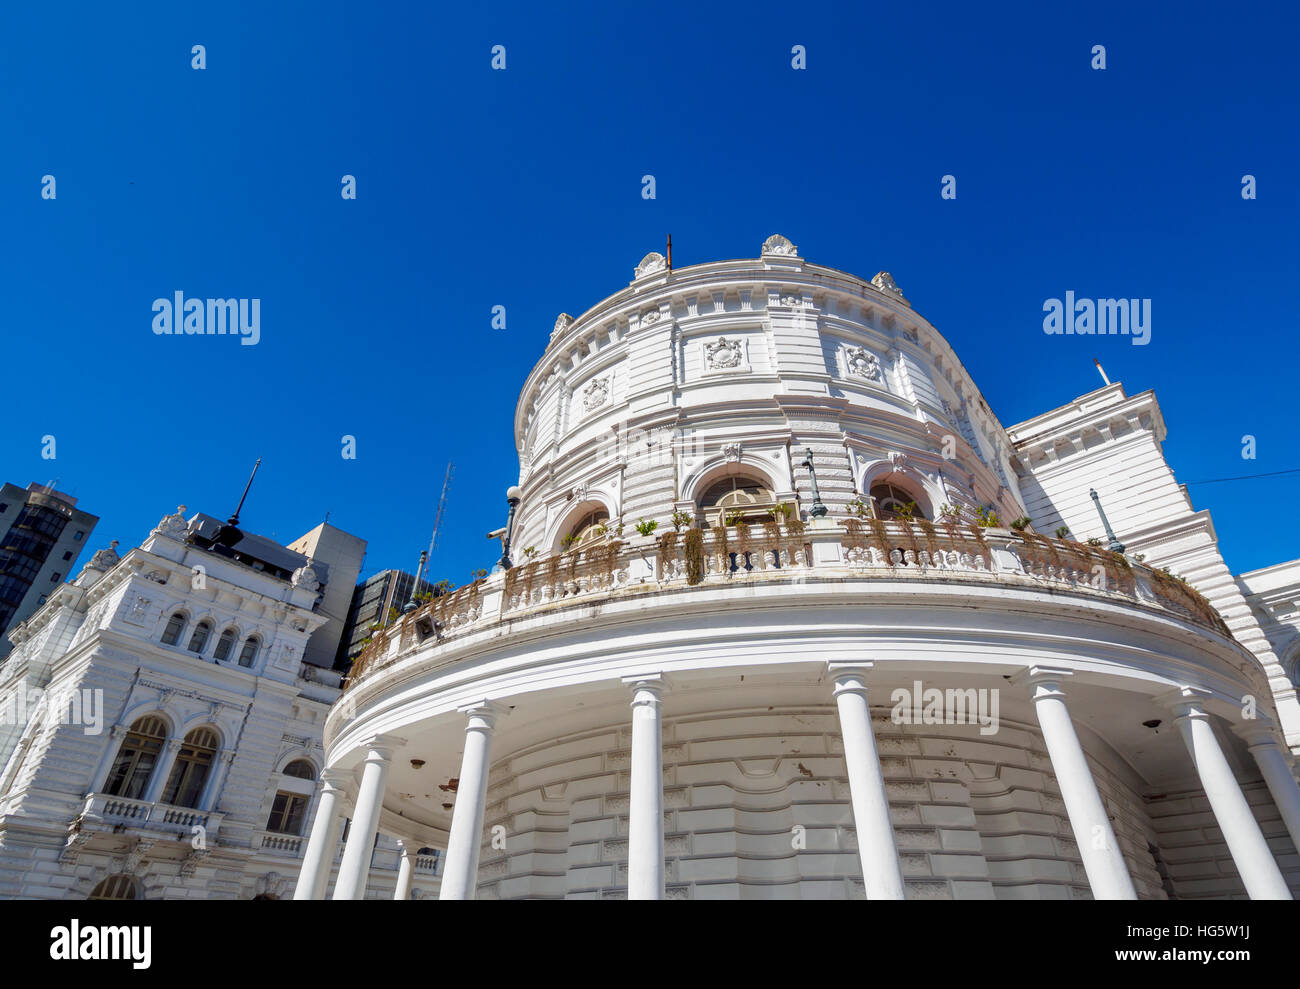 Argentina, Buenos Aires Province, La Plata, View of the City Hall on Plaza Moreno. Stock Photo